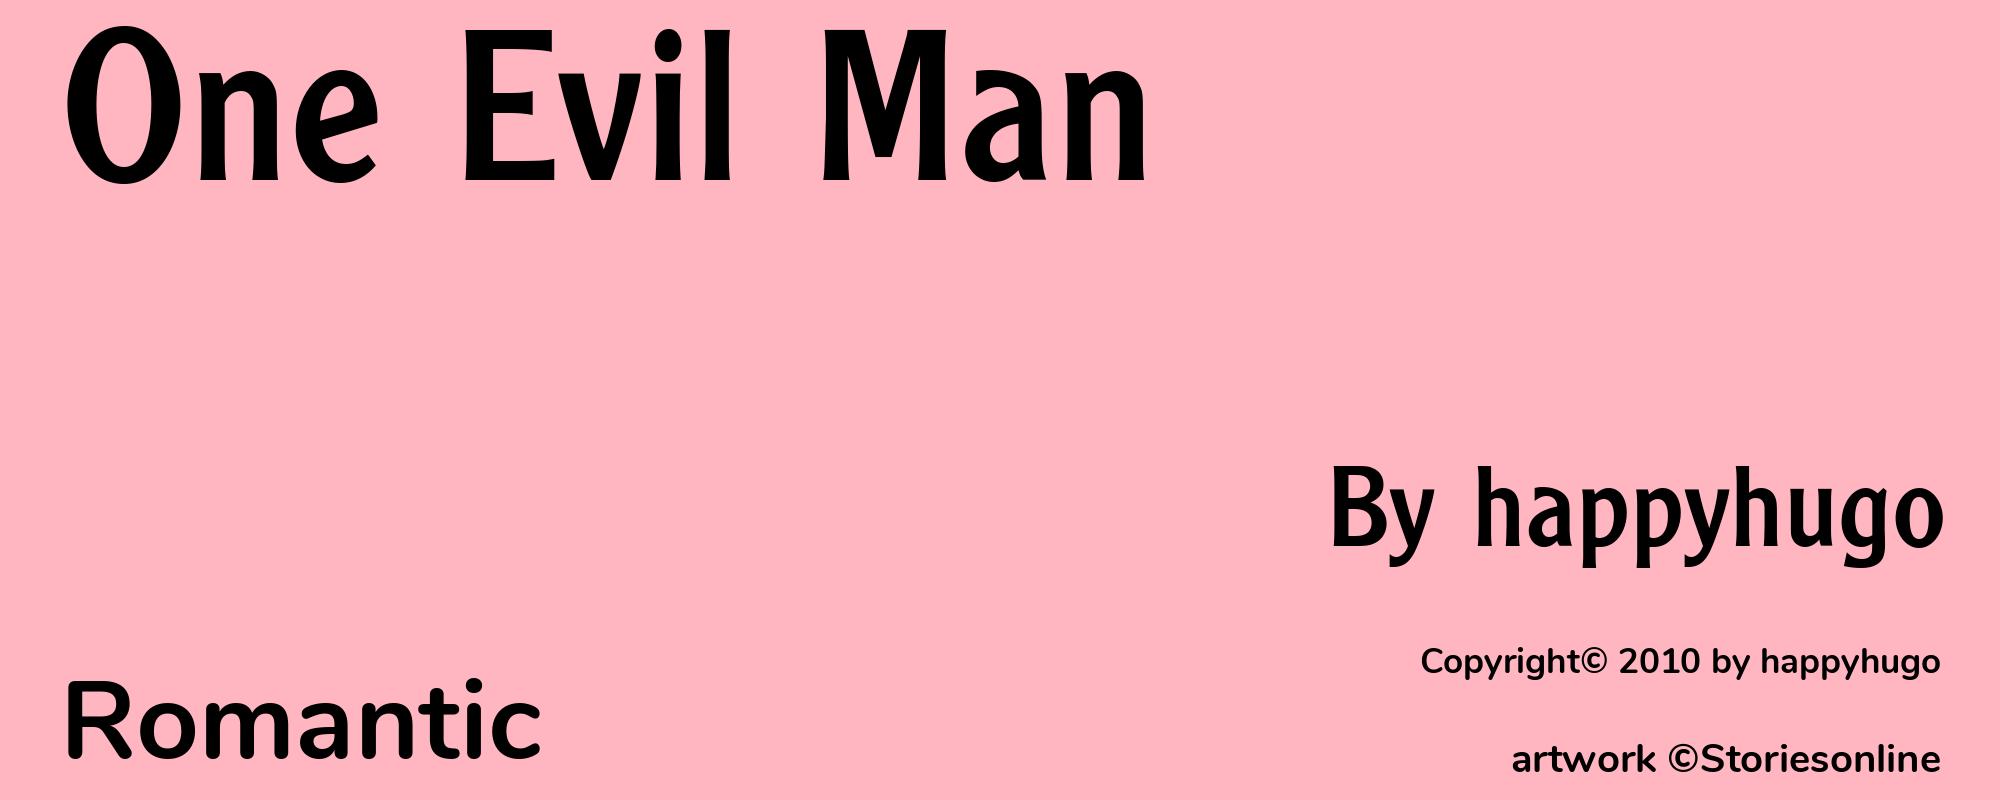 One Evil Man - Cover